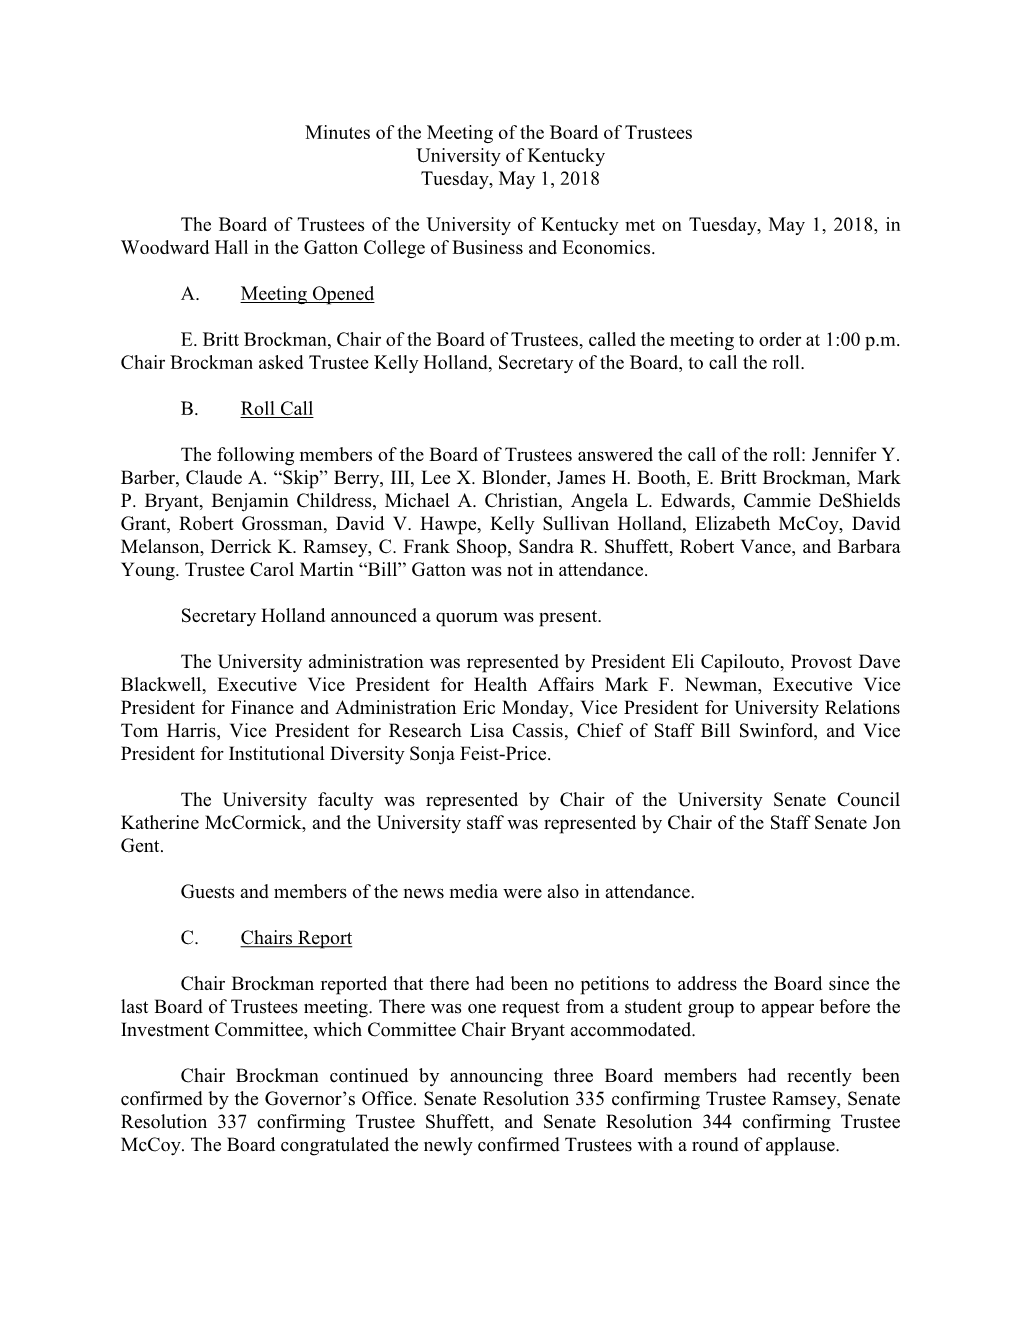 Minutes of the Meeting of the Board of Trustees University of Kentucky Tuesday, May 1, 2018 the Board of Trustees of the Univers